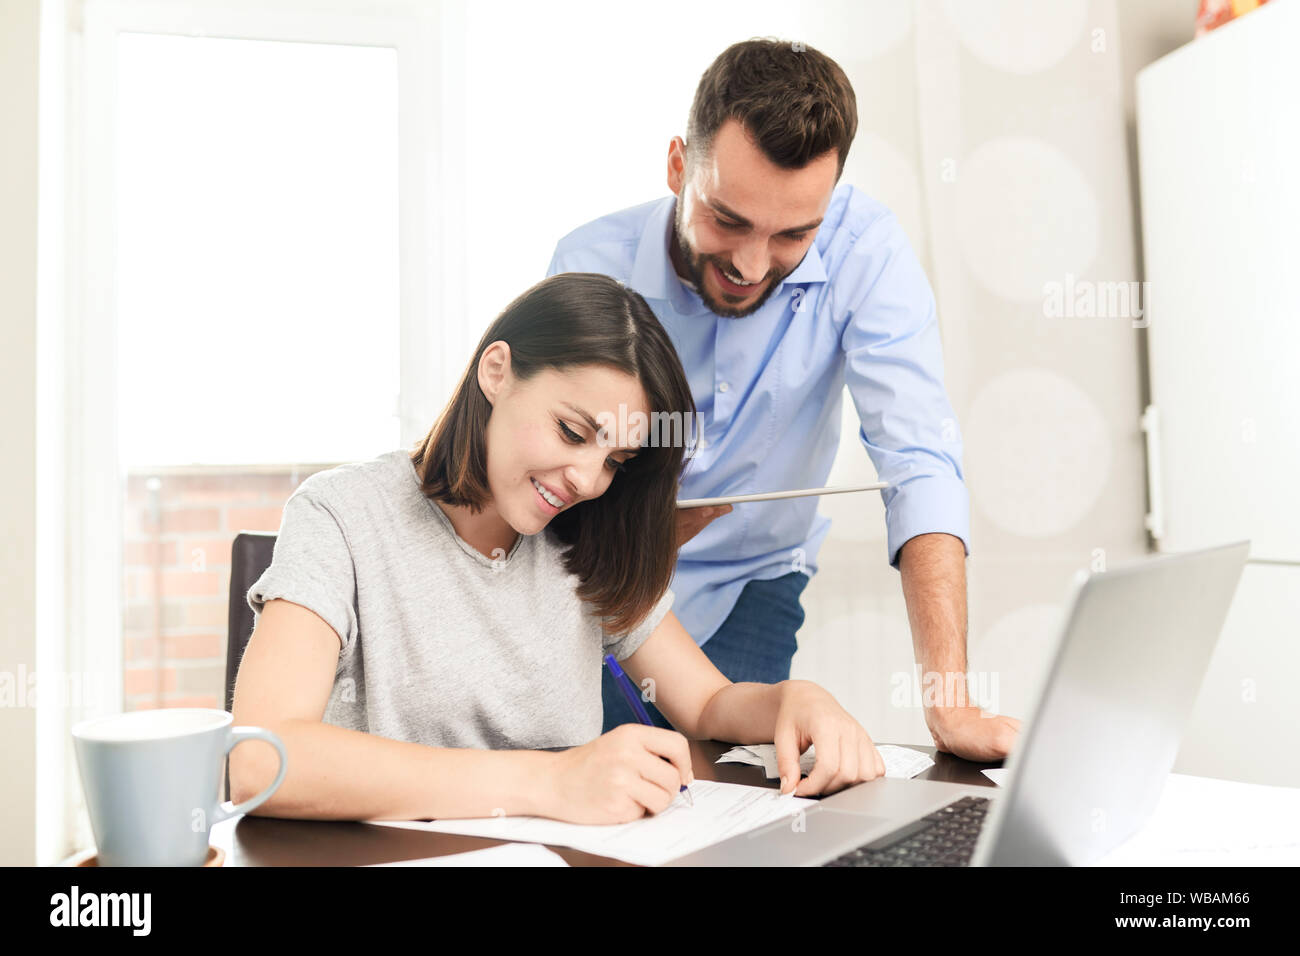 Content confident young man using tablet app while assisting girlfriend Stock Photo